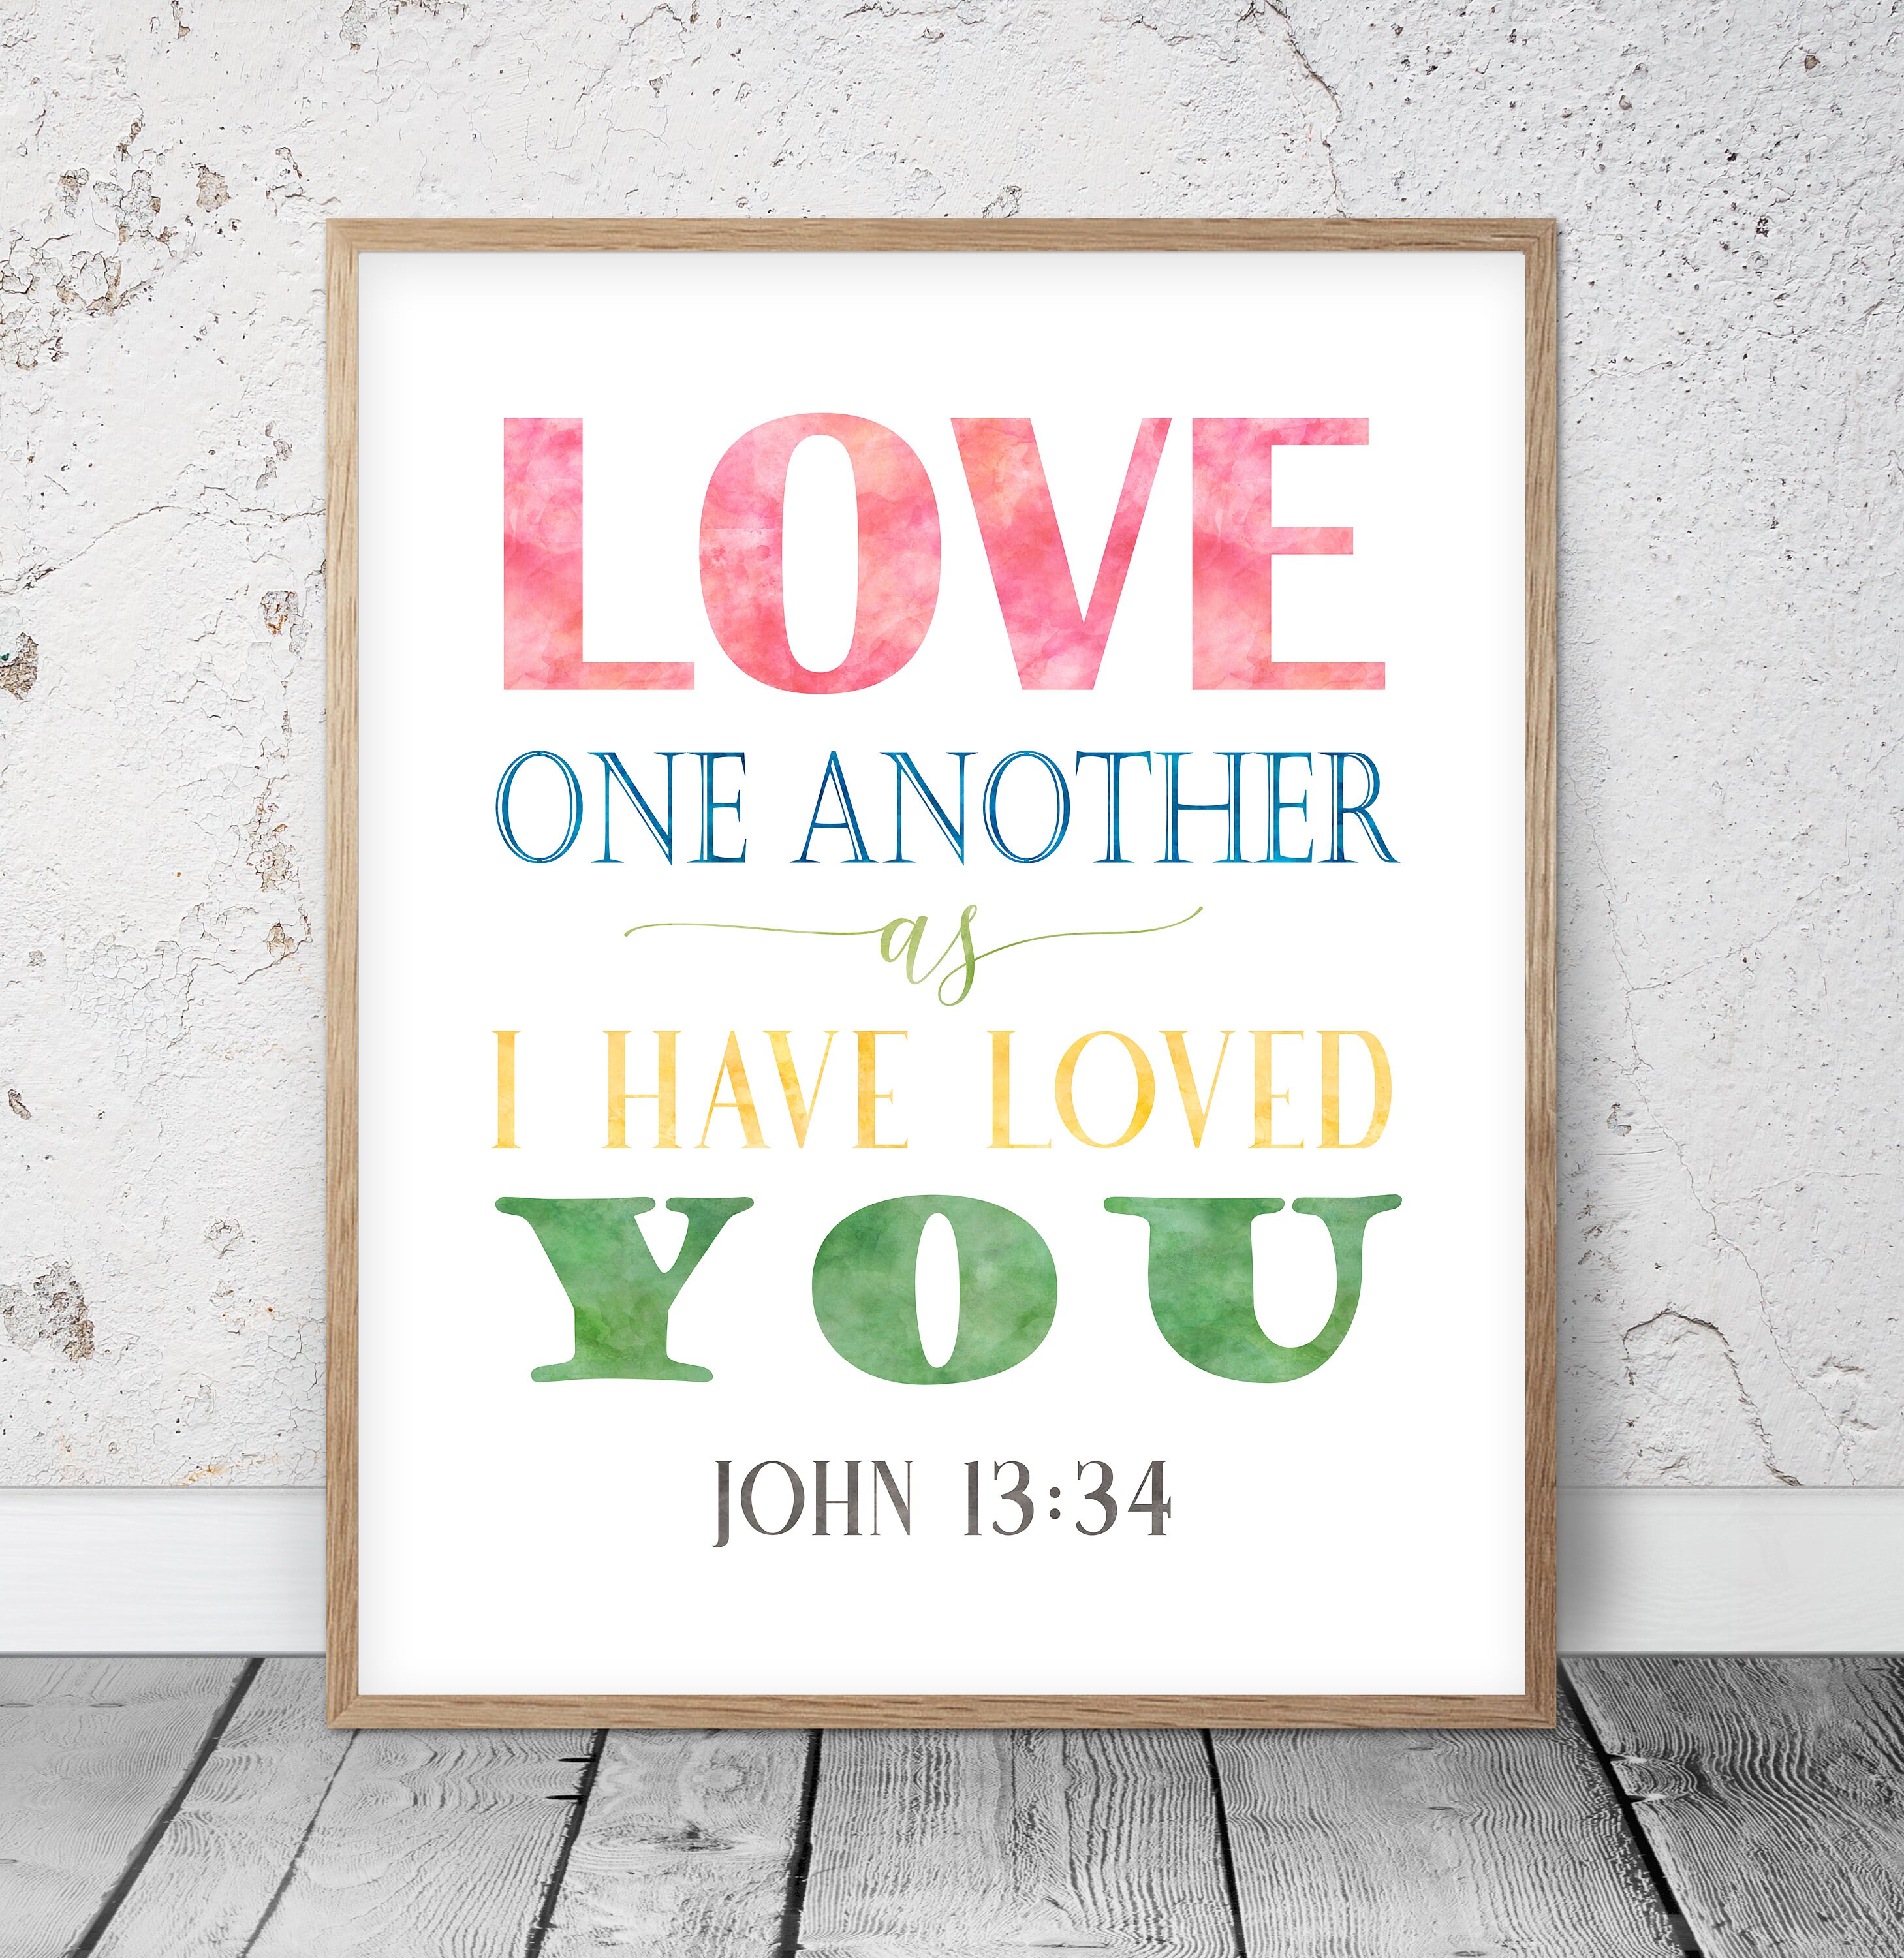 Love One Another As I Have Loved You John 1334 Printable Etsy